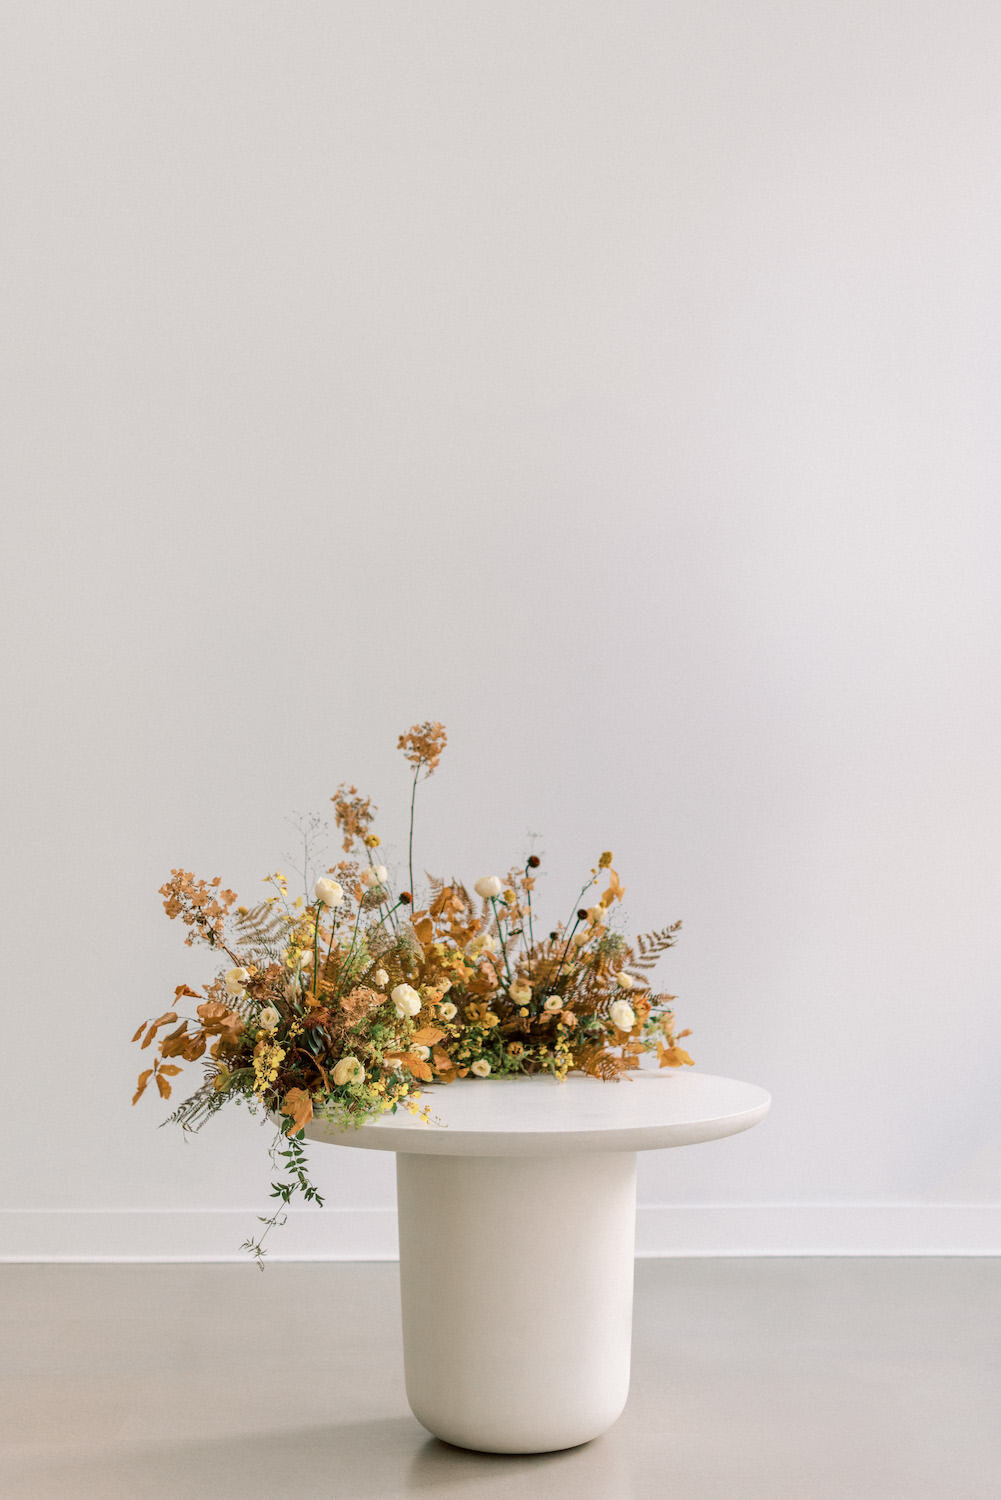 Photo: Pam Kriangkum // Florals: Fall For Florals